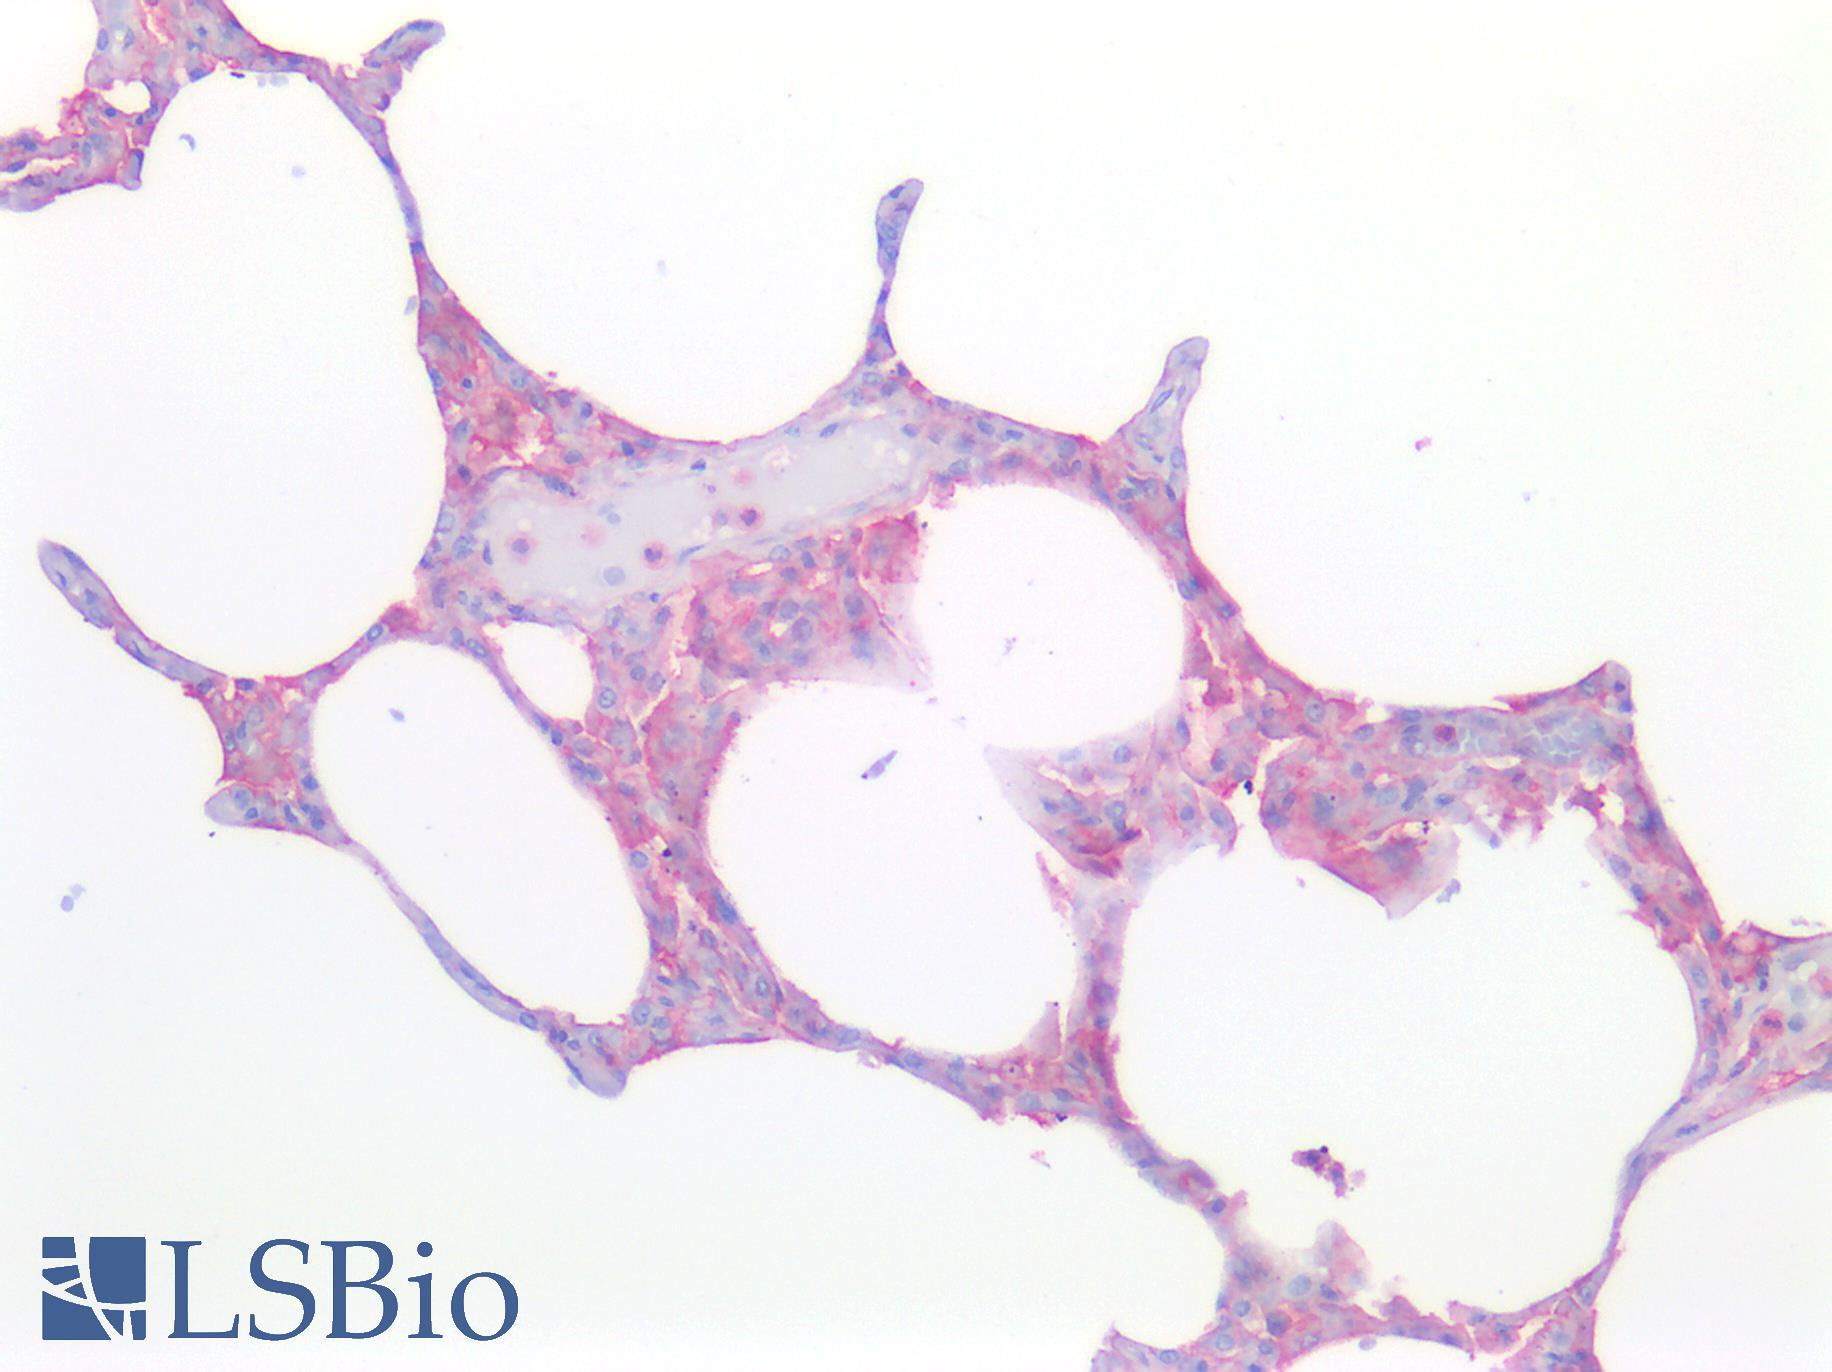 CD33 Antibody - Human Lung: Formalin-Fixed, Paraffin-Embedded (FFPE)